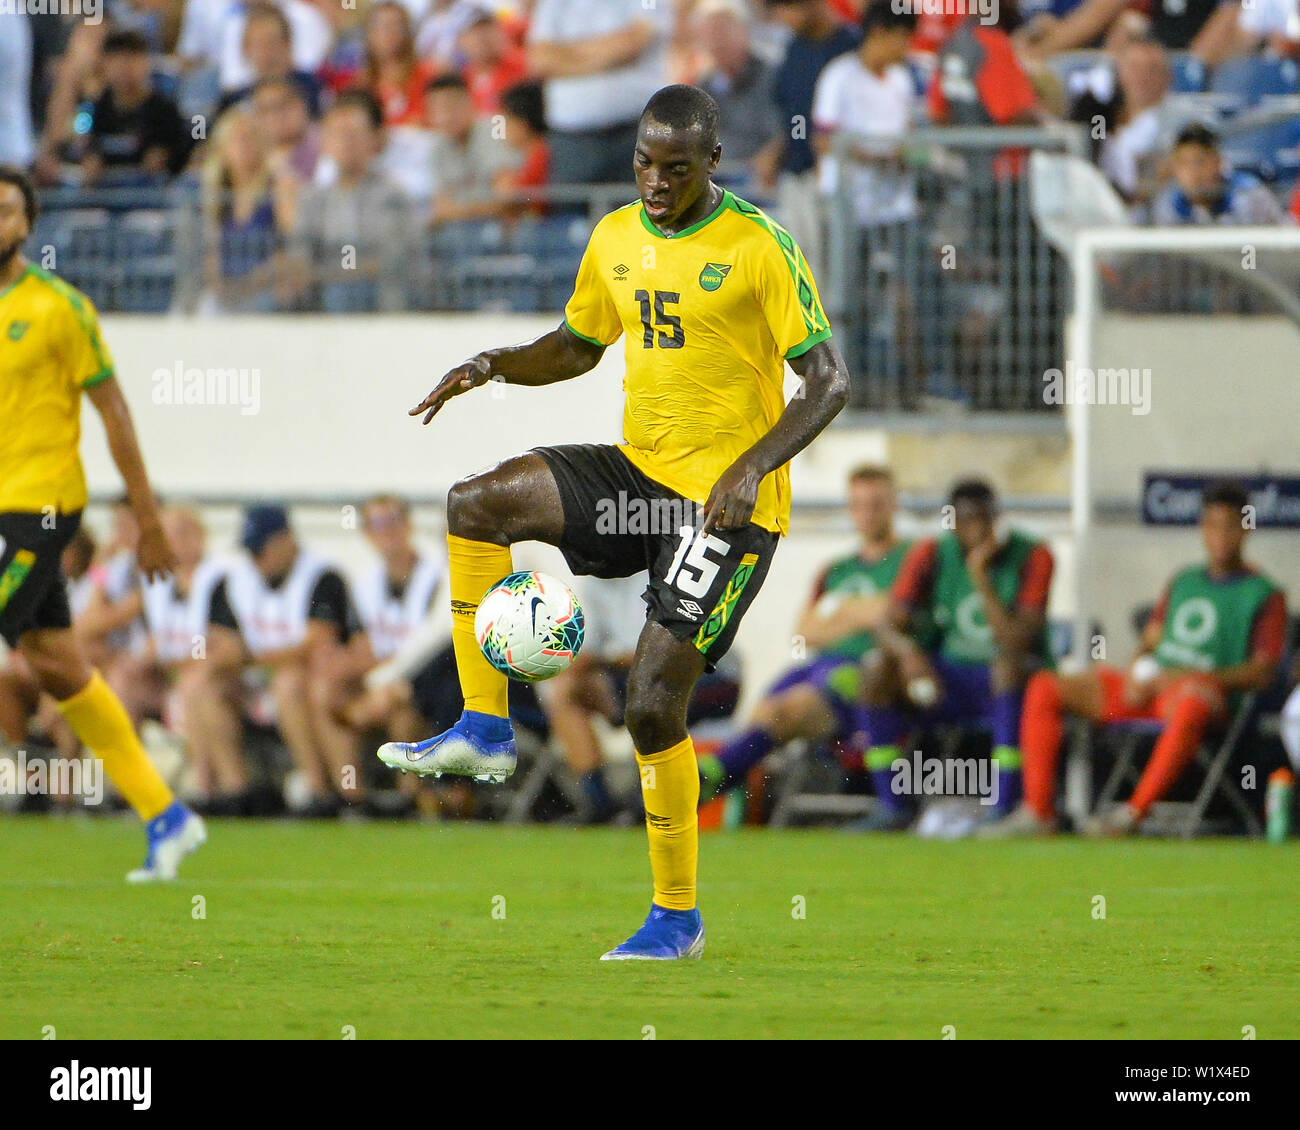 Collection 93+ Images concacaf gold cup semi final at q2 stadium Superb